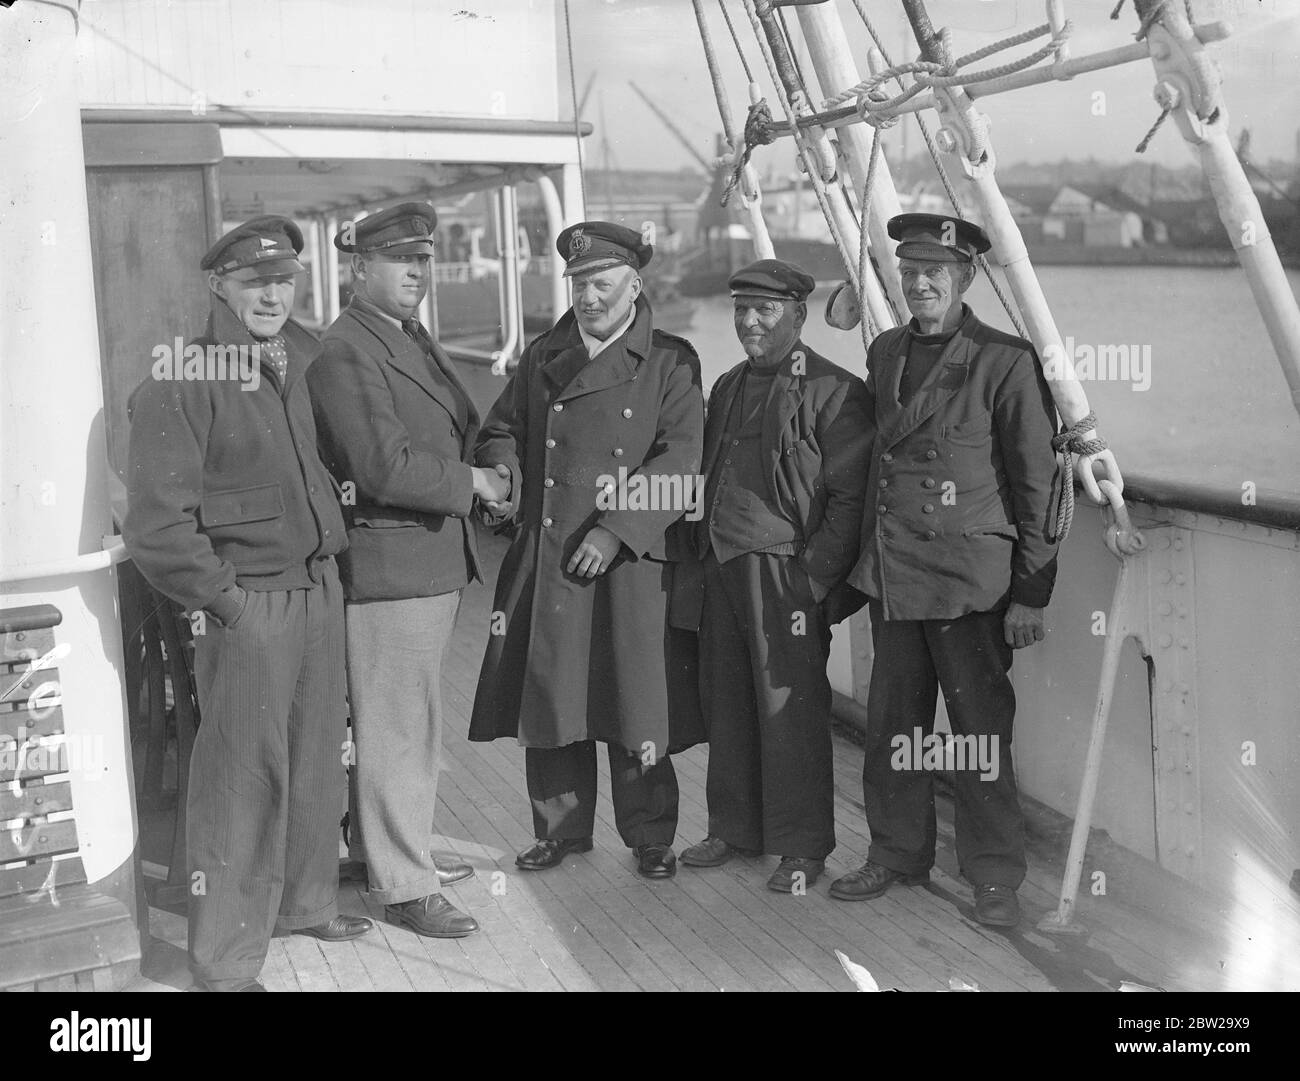 Foundered yachts crew at Southampton after mid-Channel rescue. Rescued by the steamer 'St Briac' when they yacht 'Tess' sank in the English Channel after a 10 hours fight with the gale, the crew of the yacht were landed at Southampton. They were on their way from Havre to Southampton when caught in the gale and despite their efforts with the pumps the yacht began to sink. They had to burn their beds to attract attention. Photo shows, the crew of the yacht 'Tess'on arrival at Southampton, Captain William Bennett, Mr Leonard Caven, John Starling and Mr P T MacBain. 24 October 1937 Stock Photo